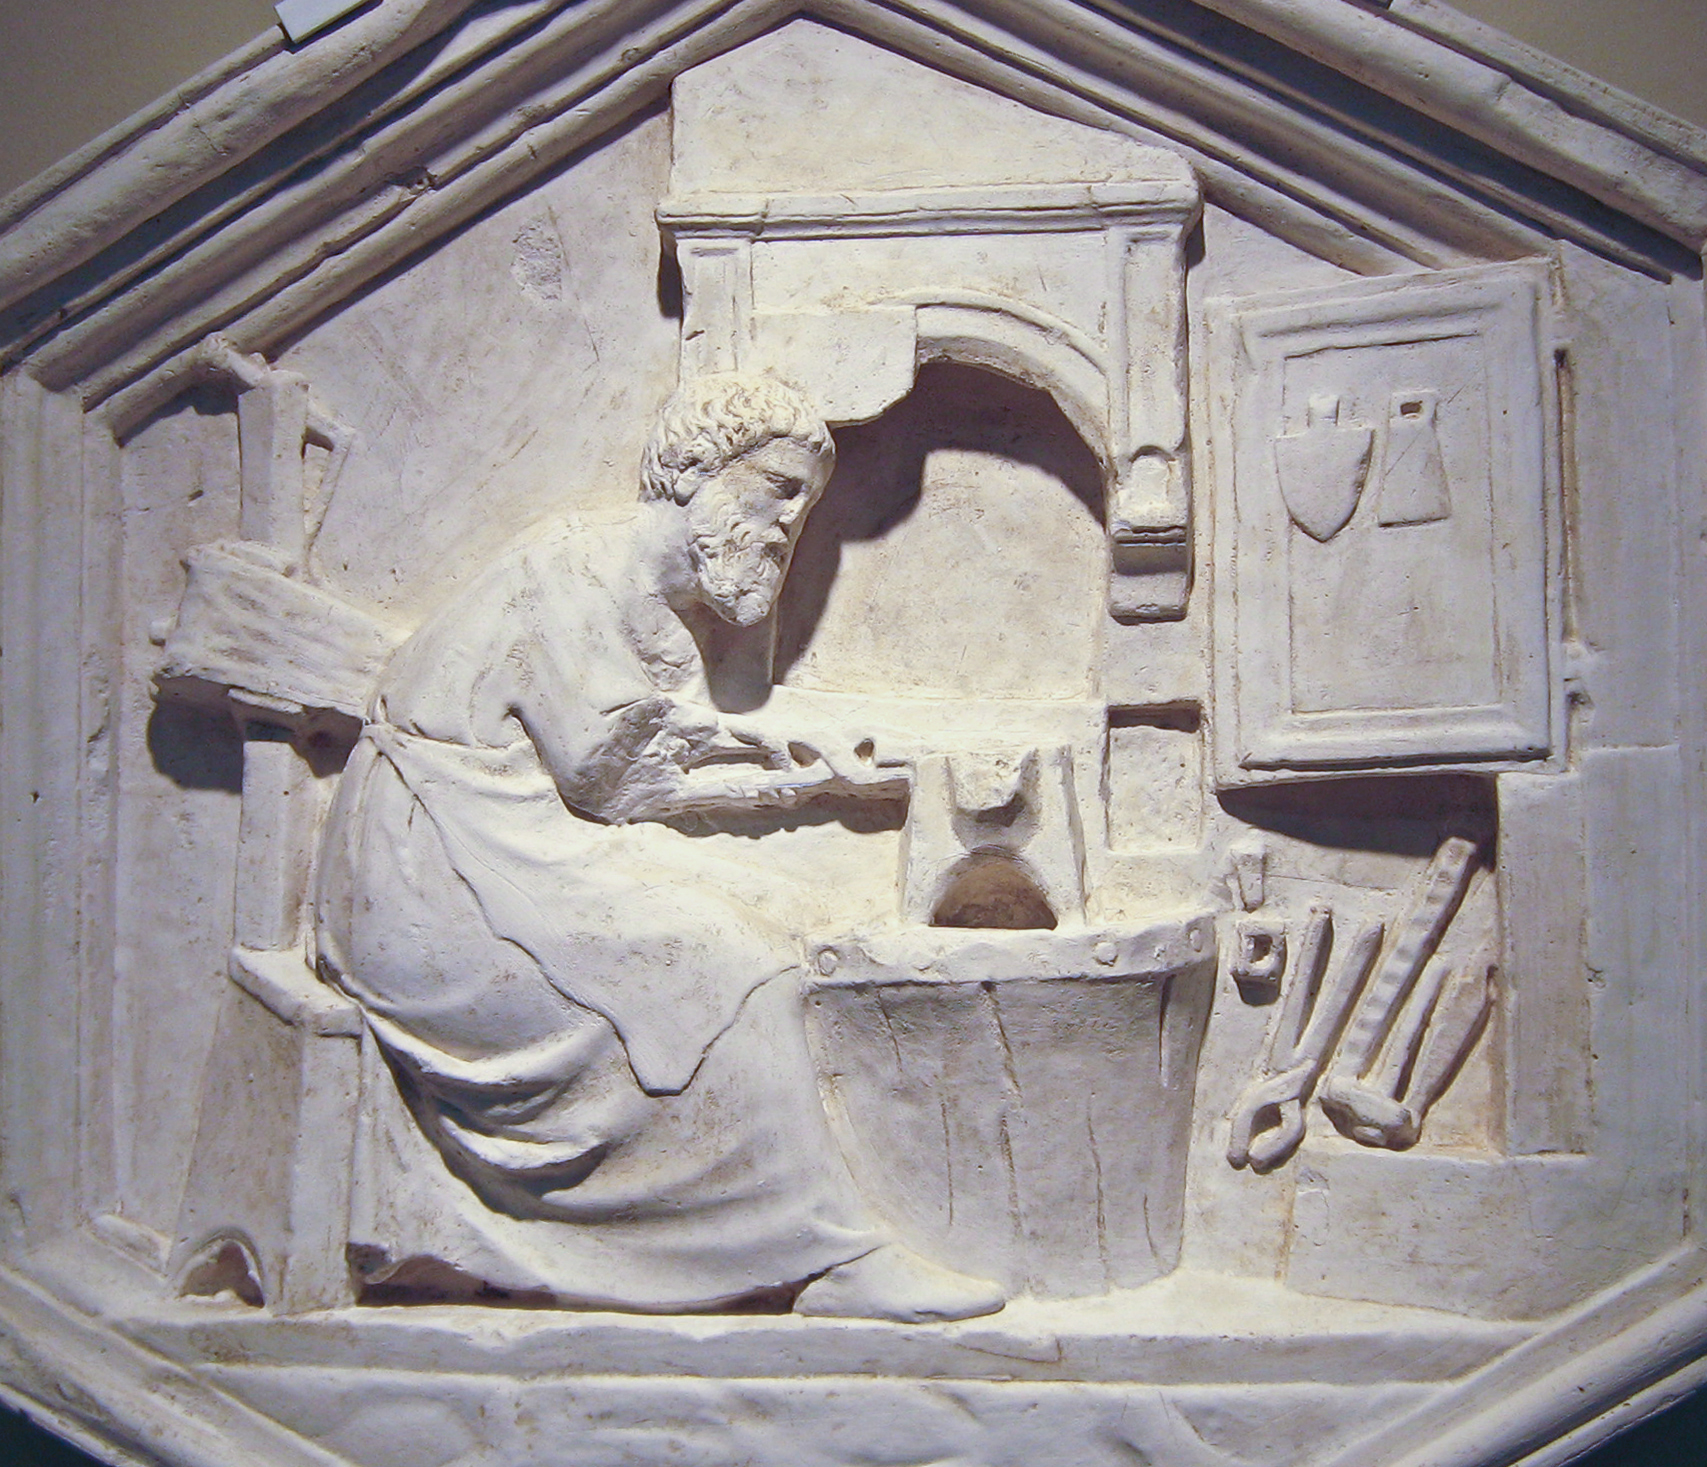 a sculpture of a woman cooking some food